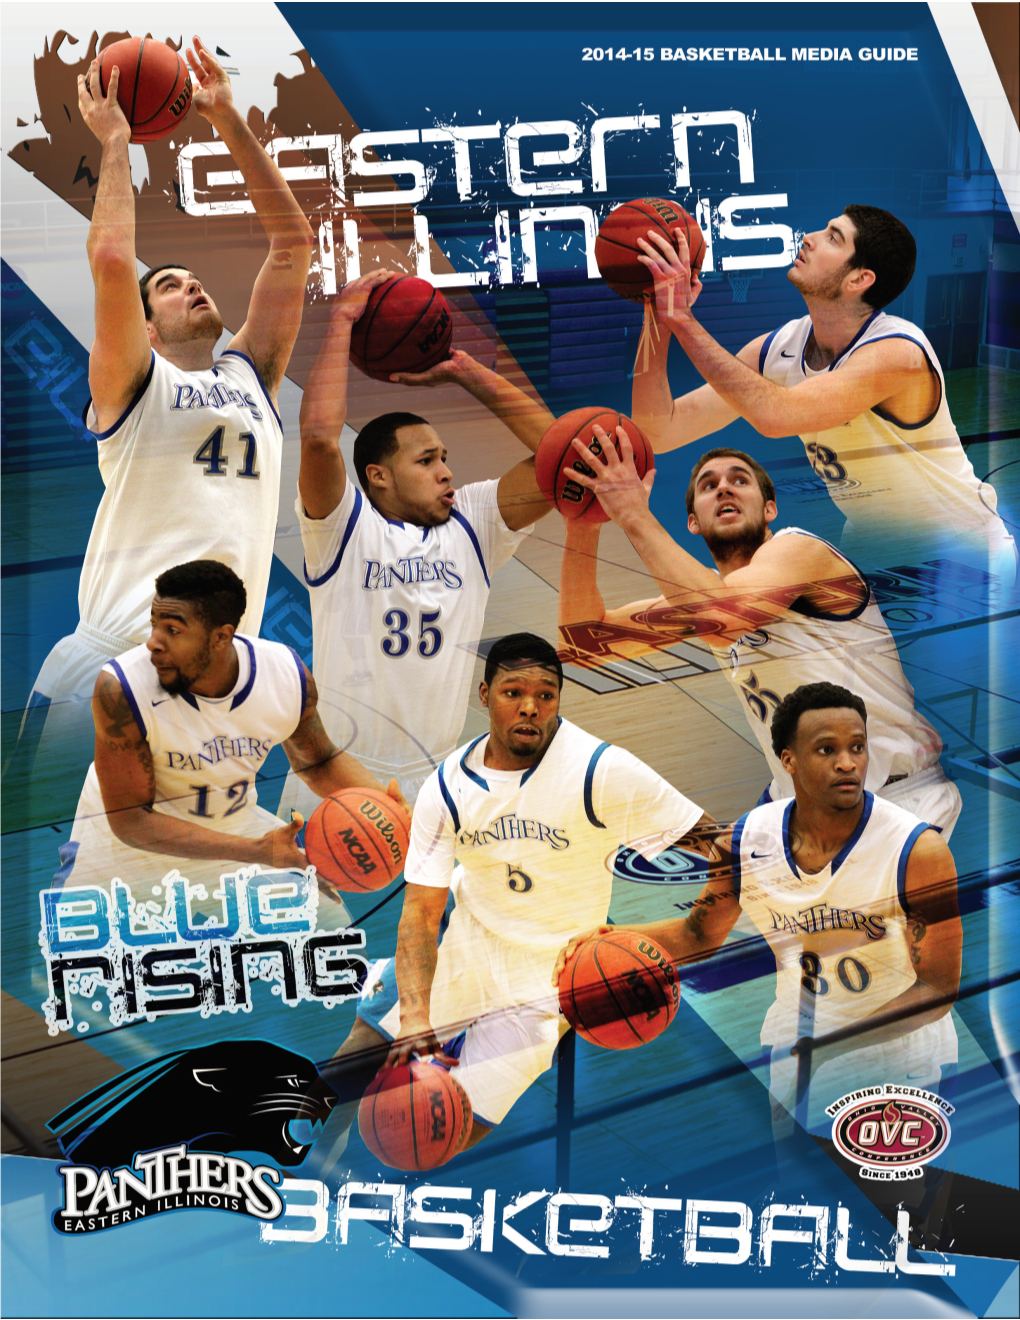 EASTERN ILLINOIS 2014-15 Men's Basketball Quick Facts